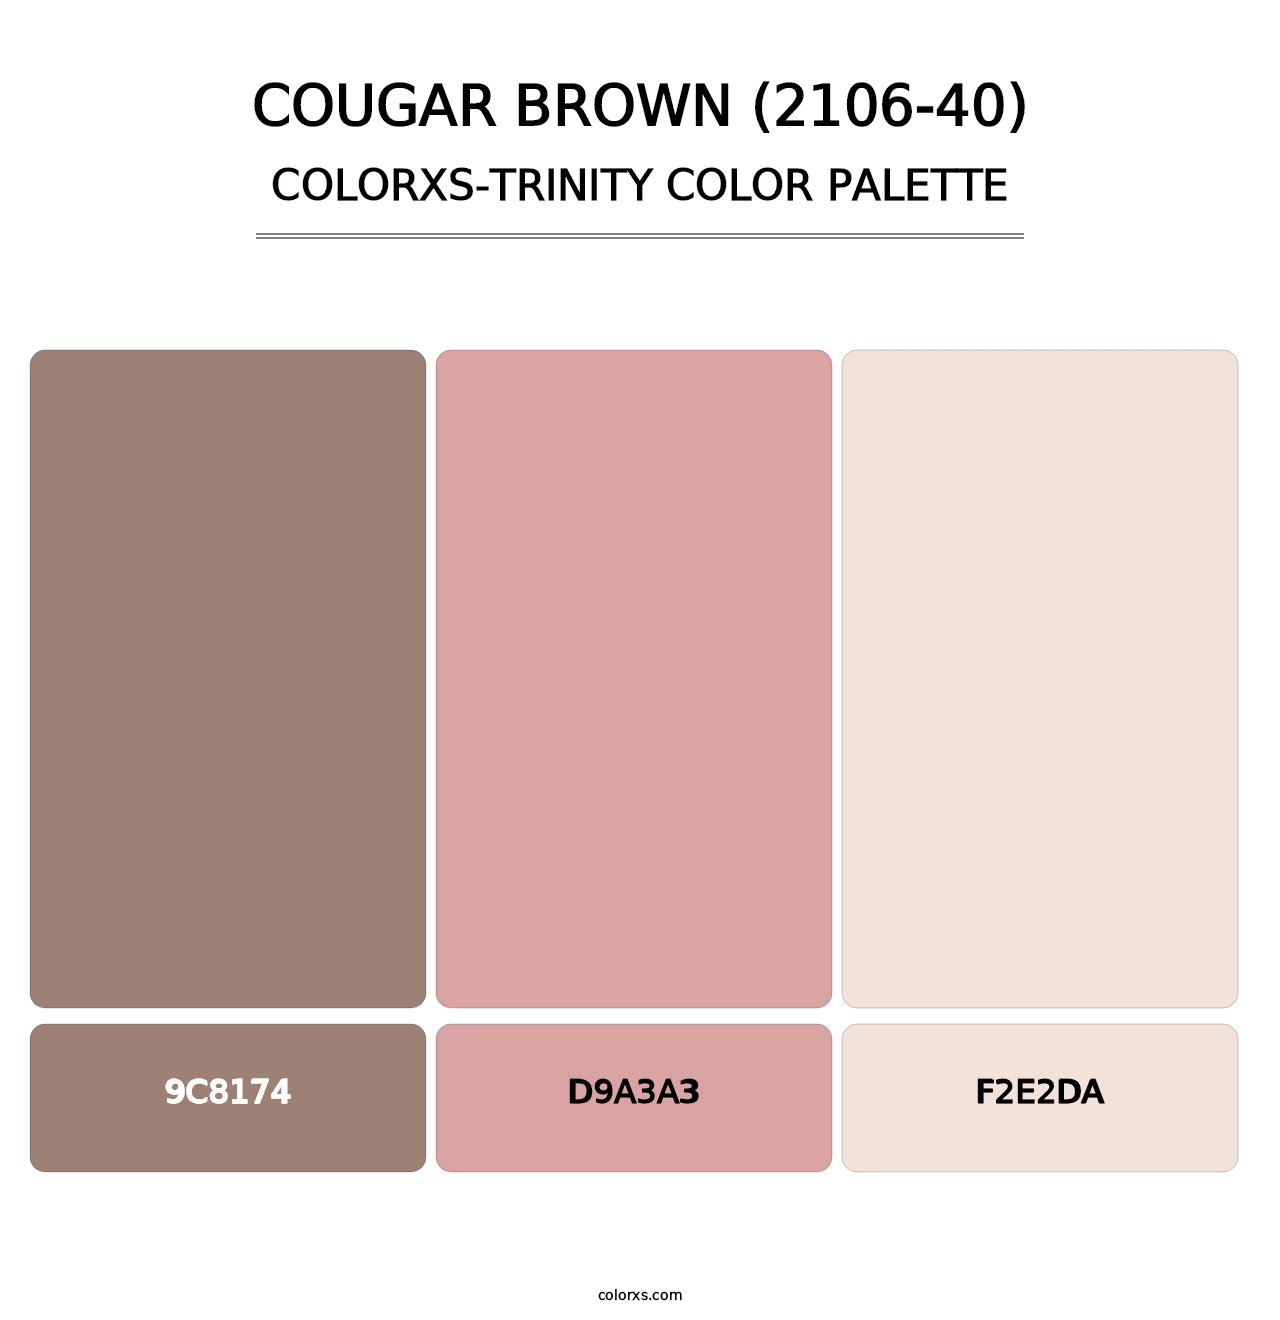 Cougar Brown (2106-40) - Colorxs Trinity Palette